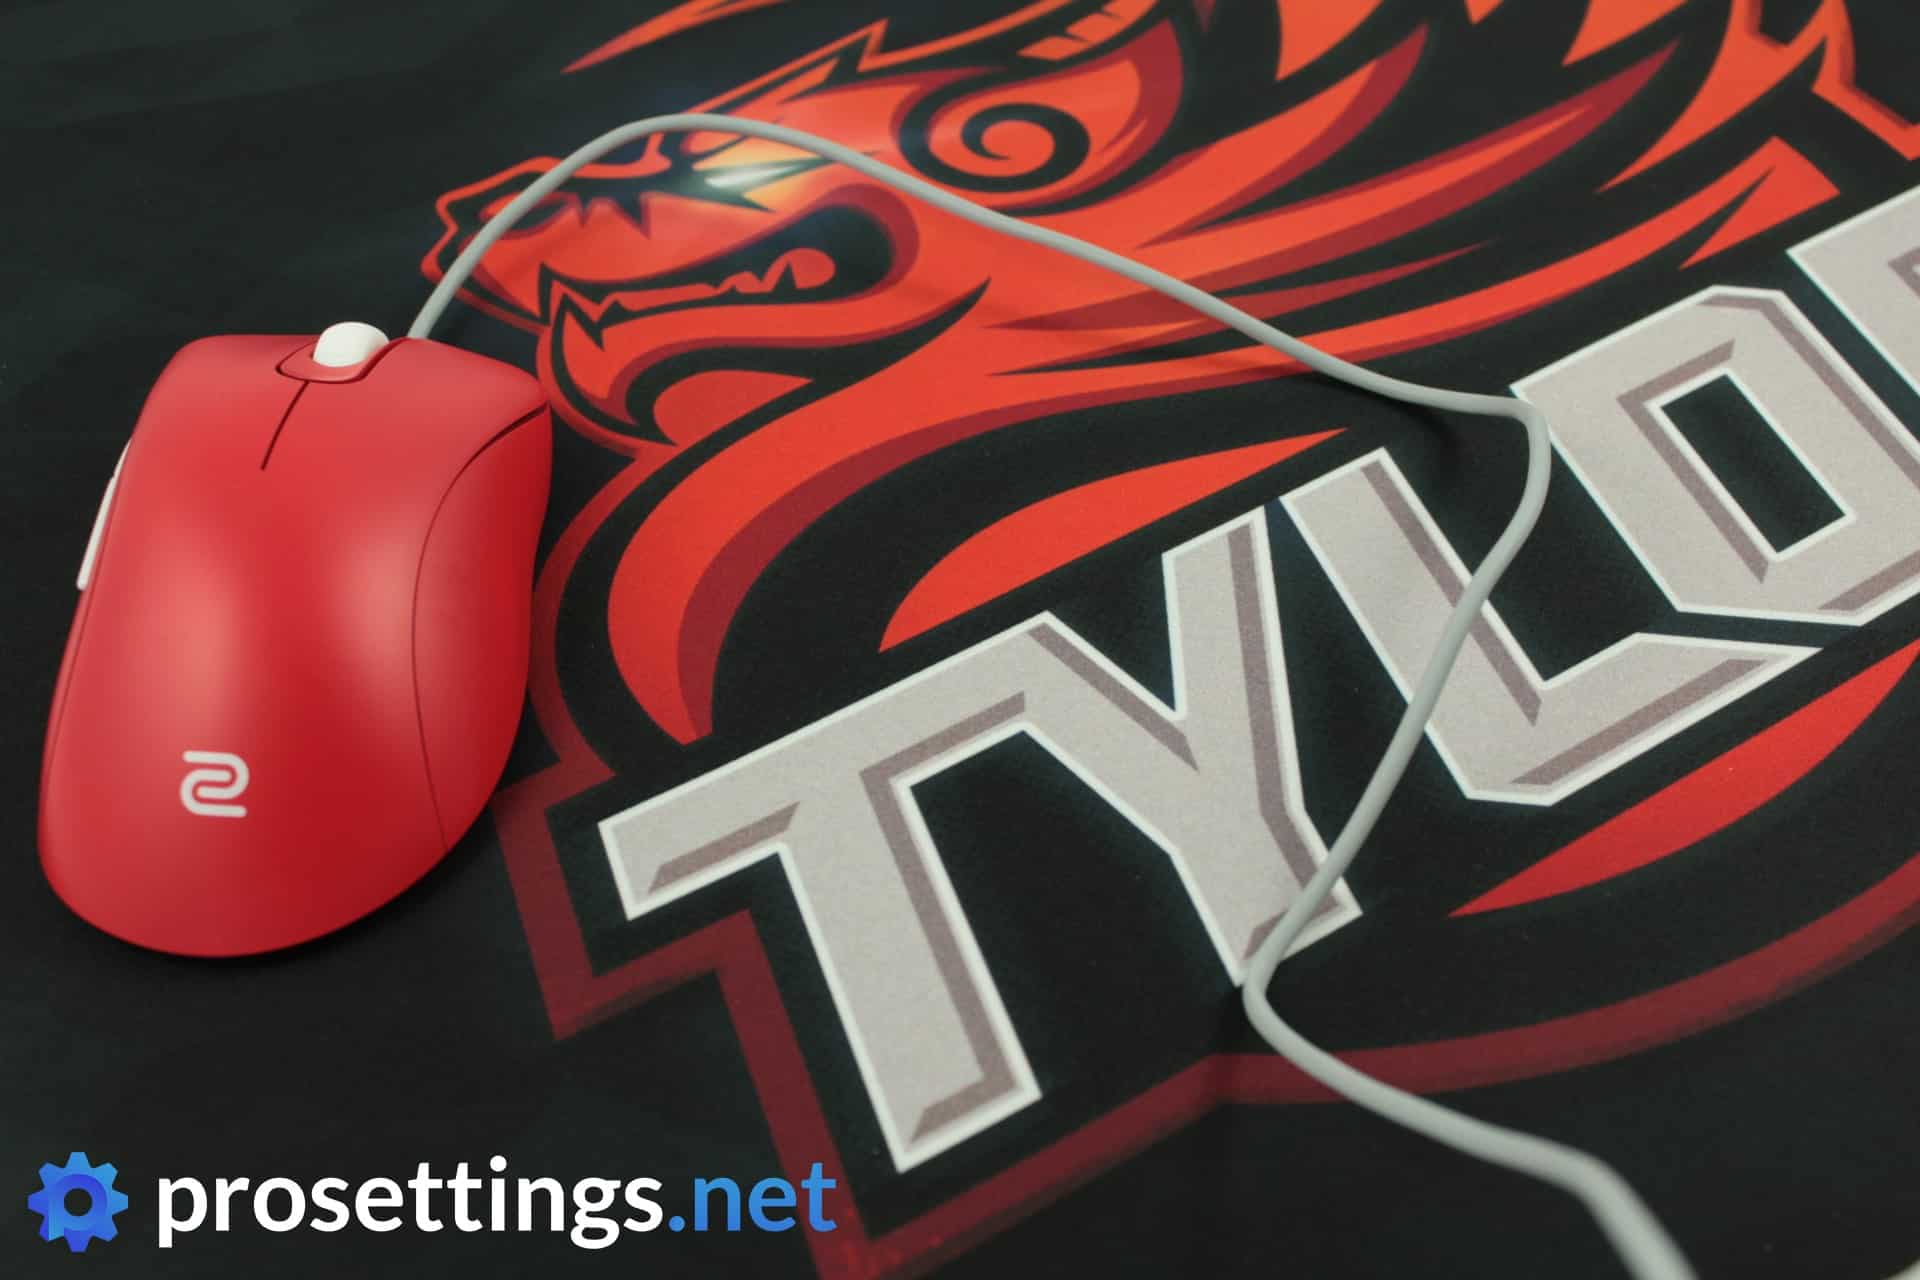 Zowie EC2 Tyloo Mouse Review